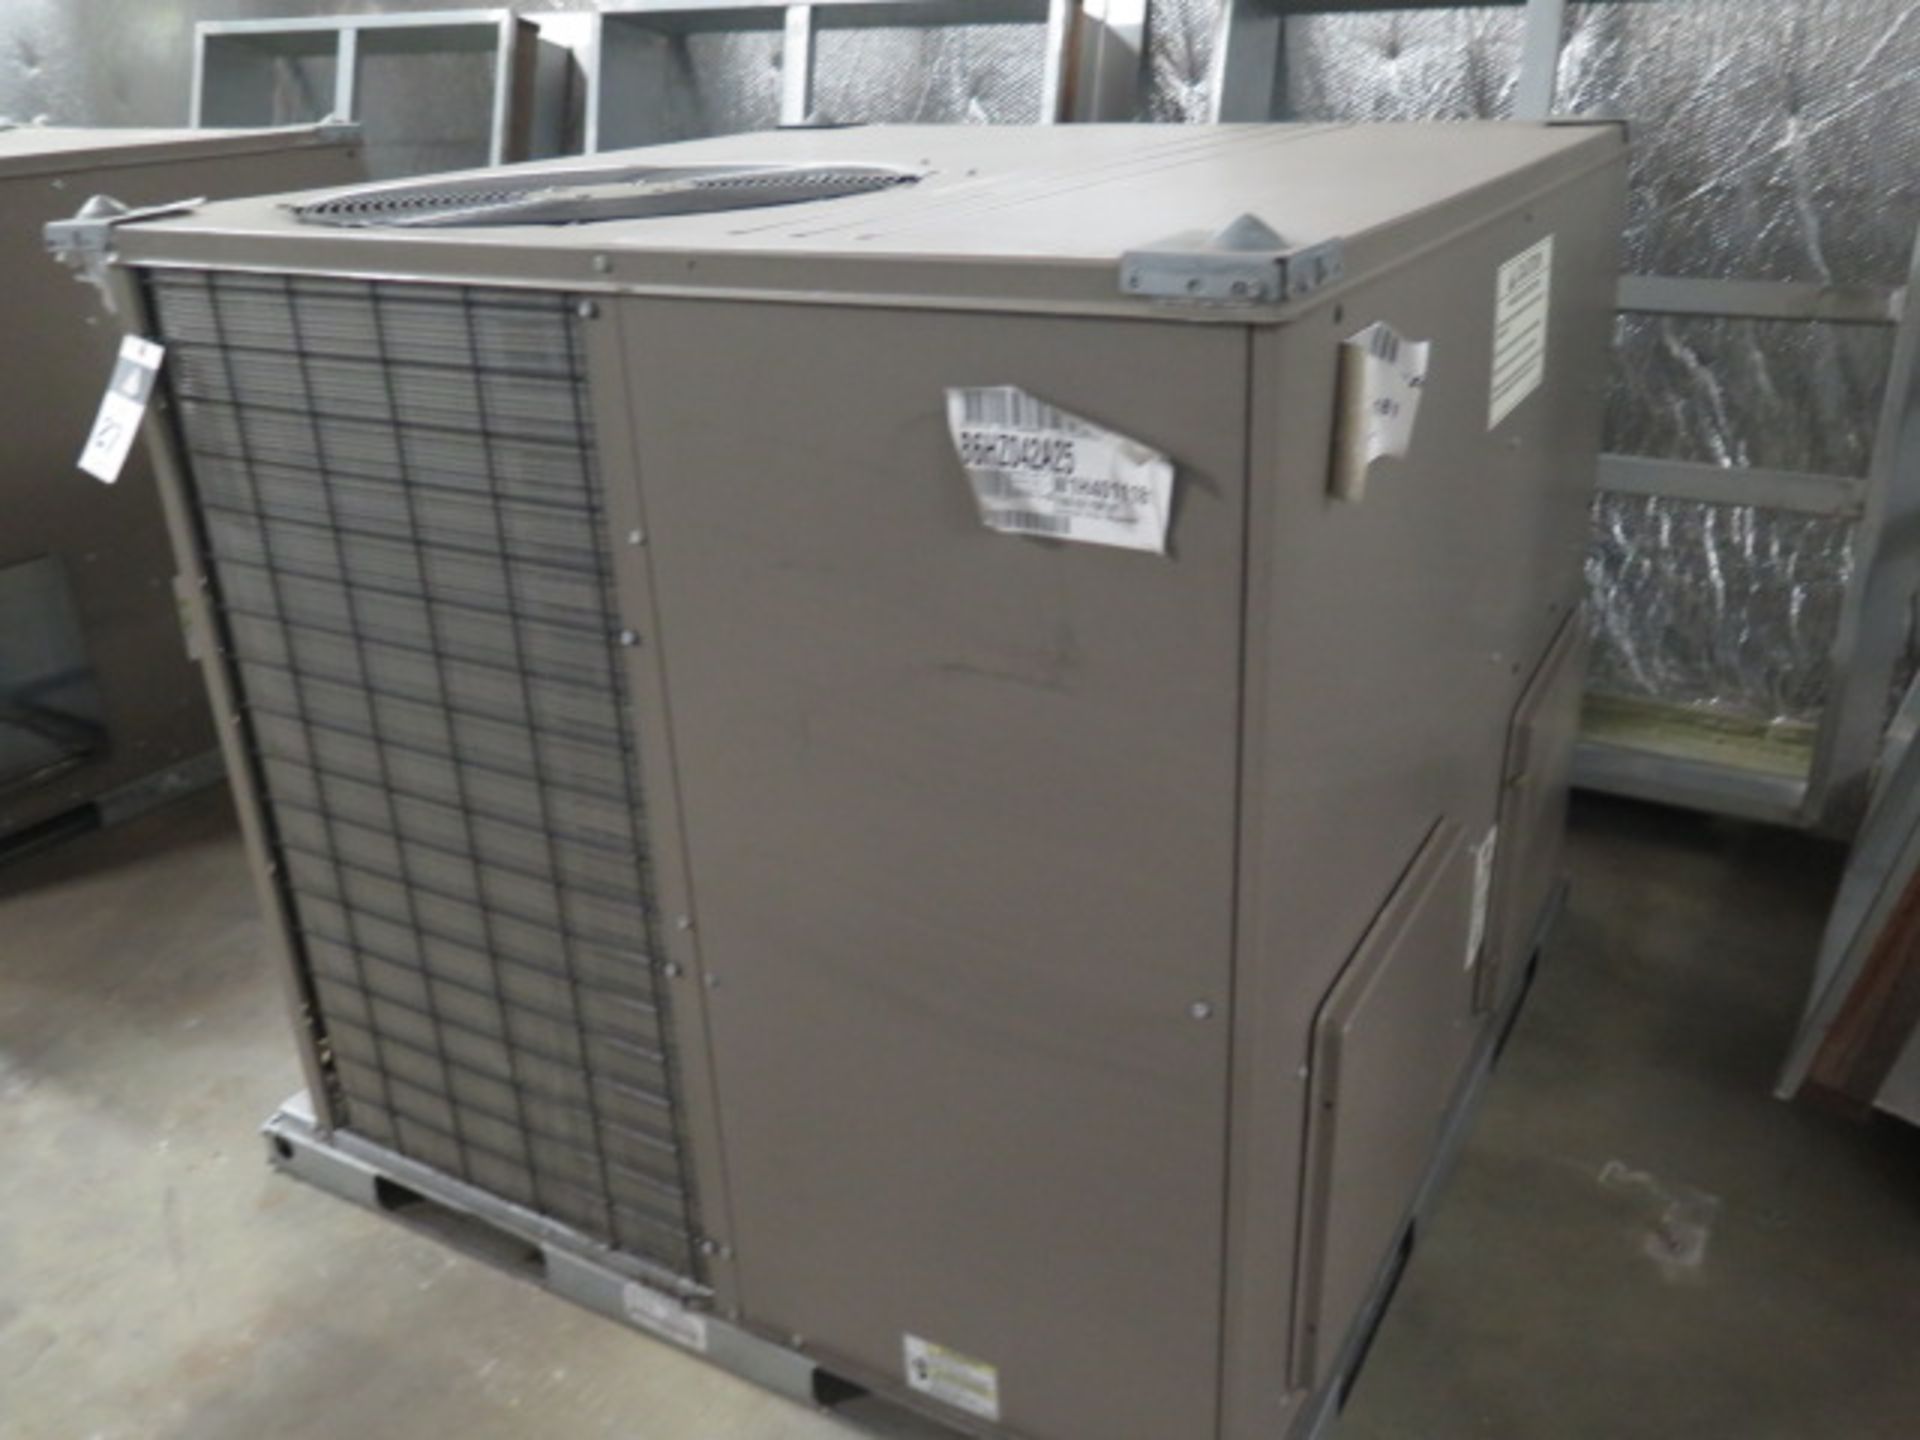 Johnson B6HZ042A25 3.5 Ton Central Heat Pump s/n W1H4011181 208/230V-3PH w/ Curb Base (SOLD AS- - Image 2 of 6